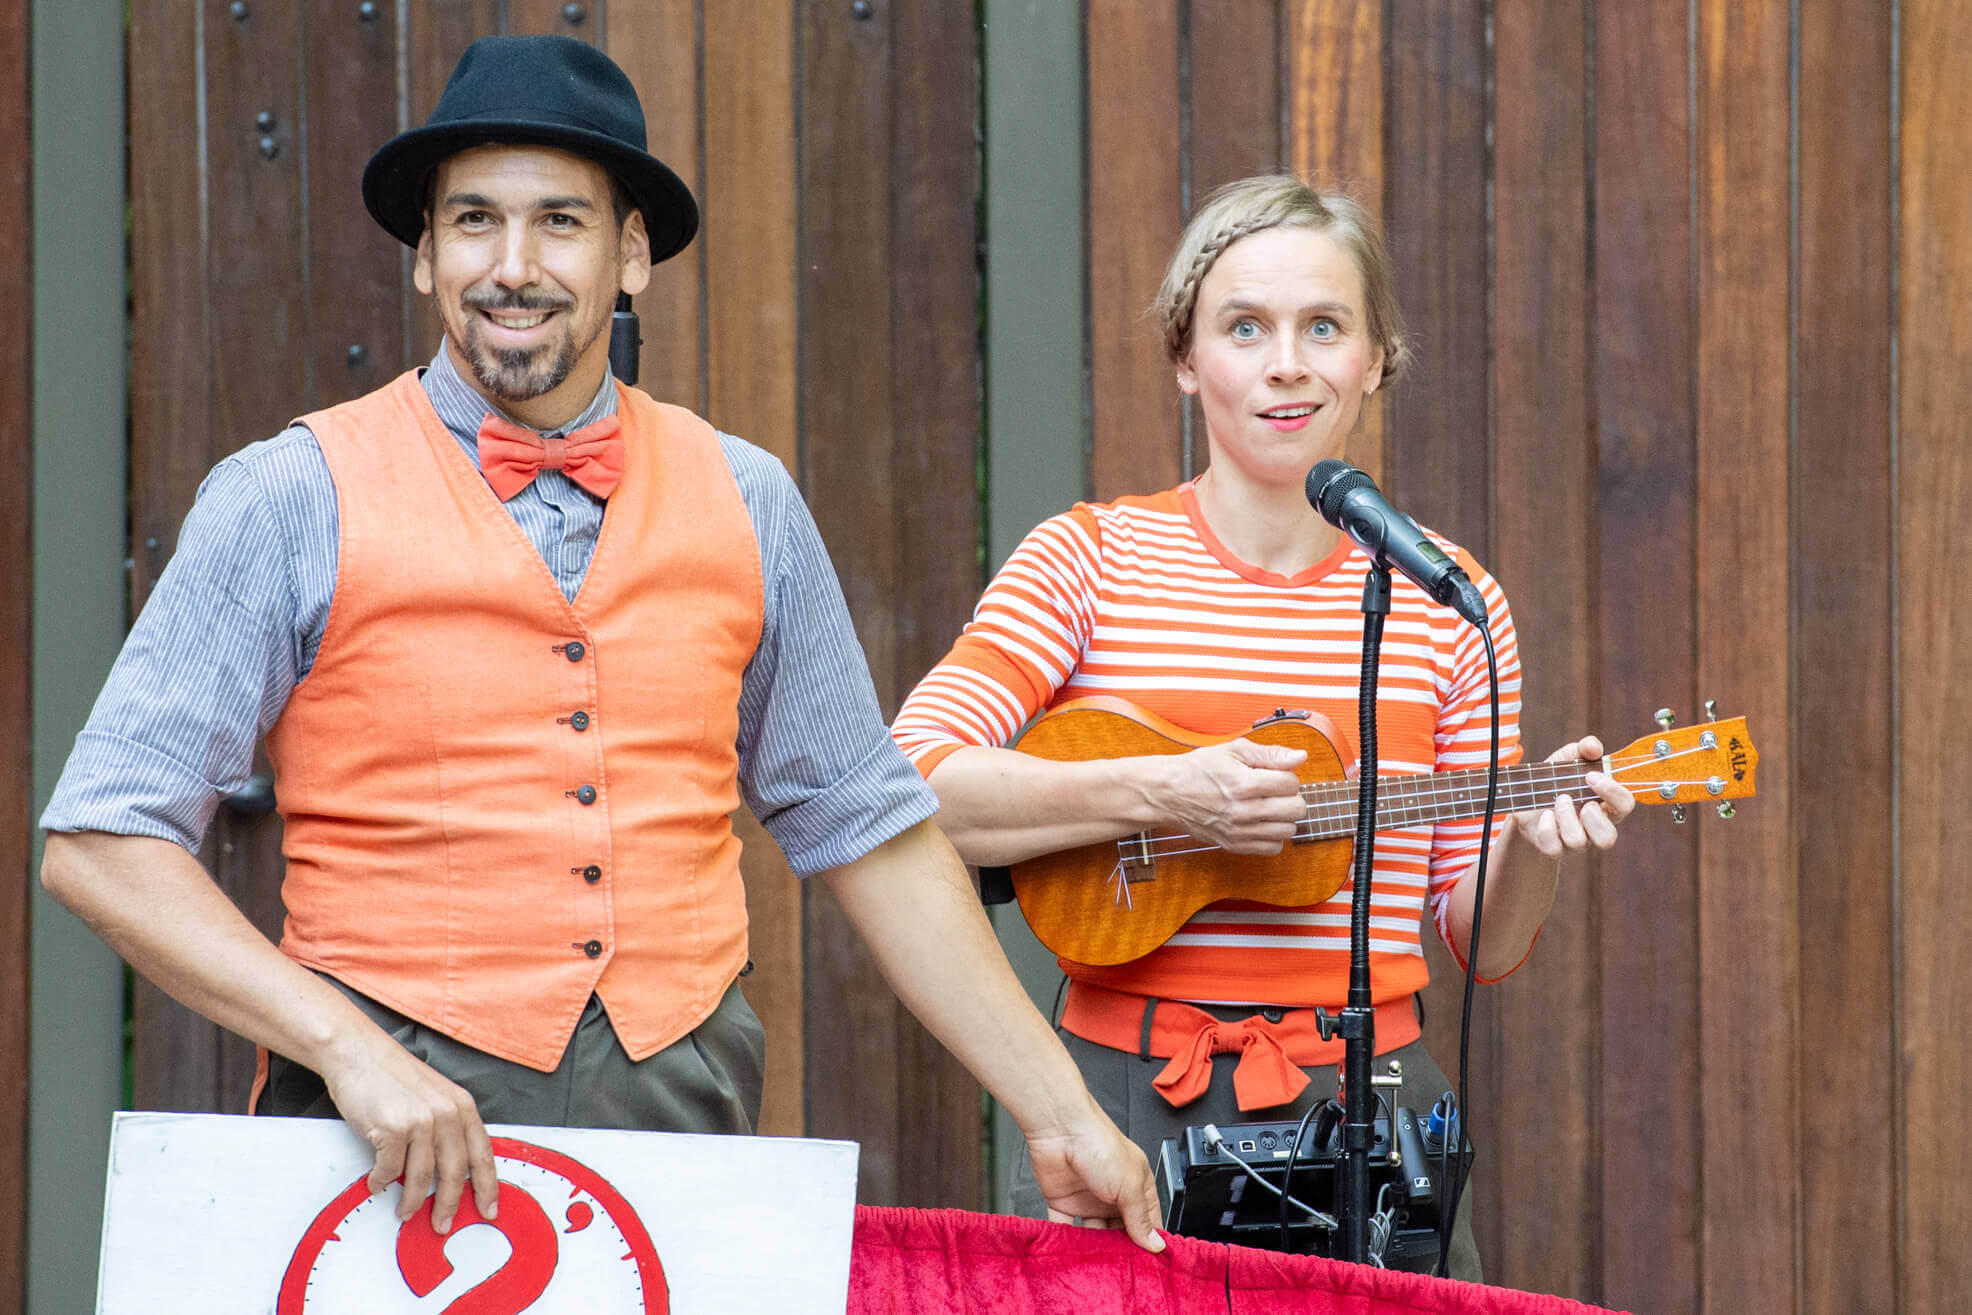 Man with hat, orange vest and bow tie, woman in orange stripes playing the ukulele, street performance, wooden background.